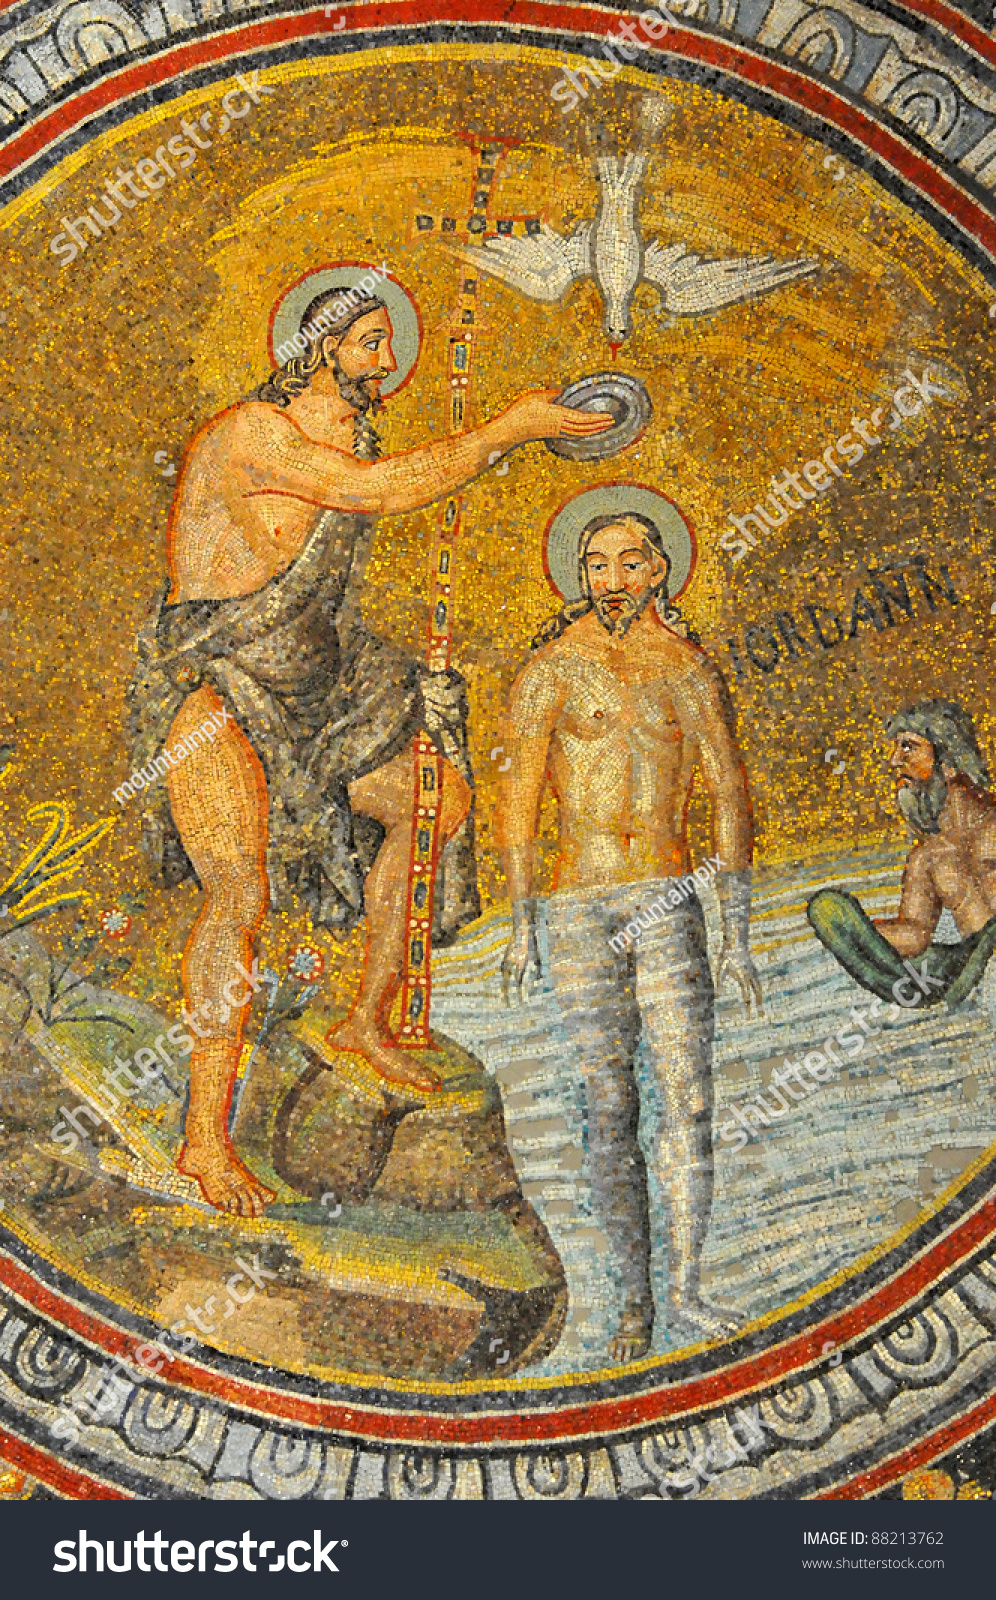 Baptism On The River Jordan A Naked Jesus Christ Being Baptised By John The Baptist From The